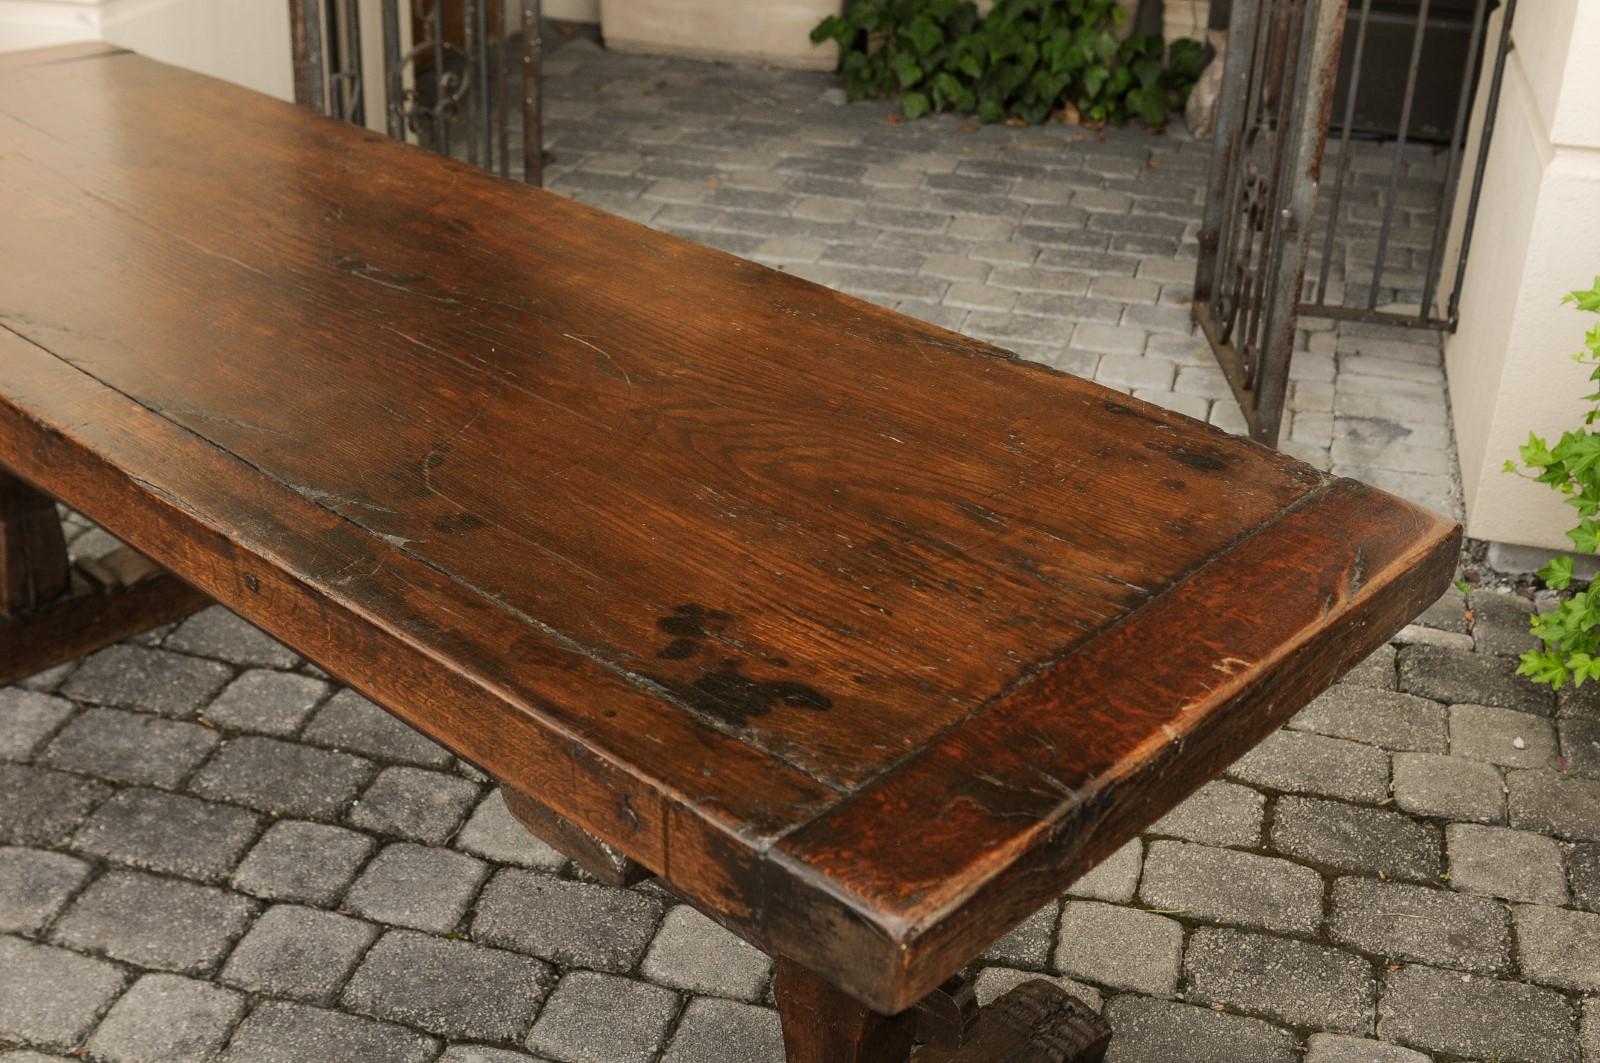 Rustic French Oak Farm Table with Trestle Base and Weathered Patina, circa 1880